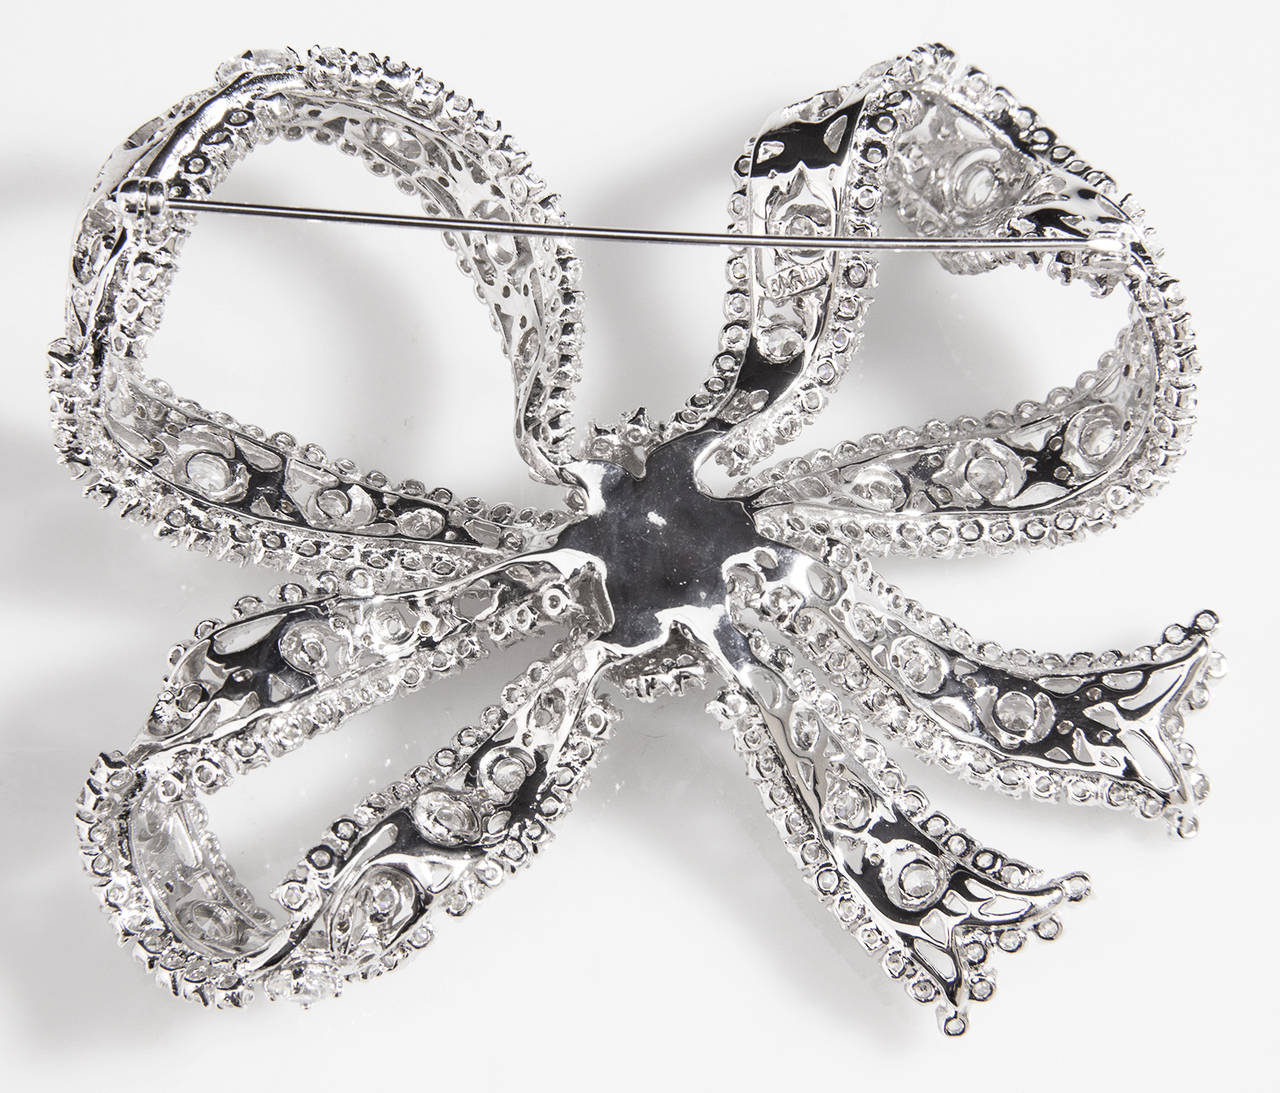 Gorgeous Designer Glittering Furled Bow Pin encrusted with sparkling CZ stones; approx. size: 3.5” x 3”. Brilliantly Made...Beautiful and unique as you are!